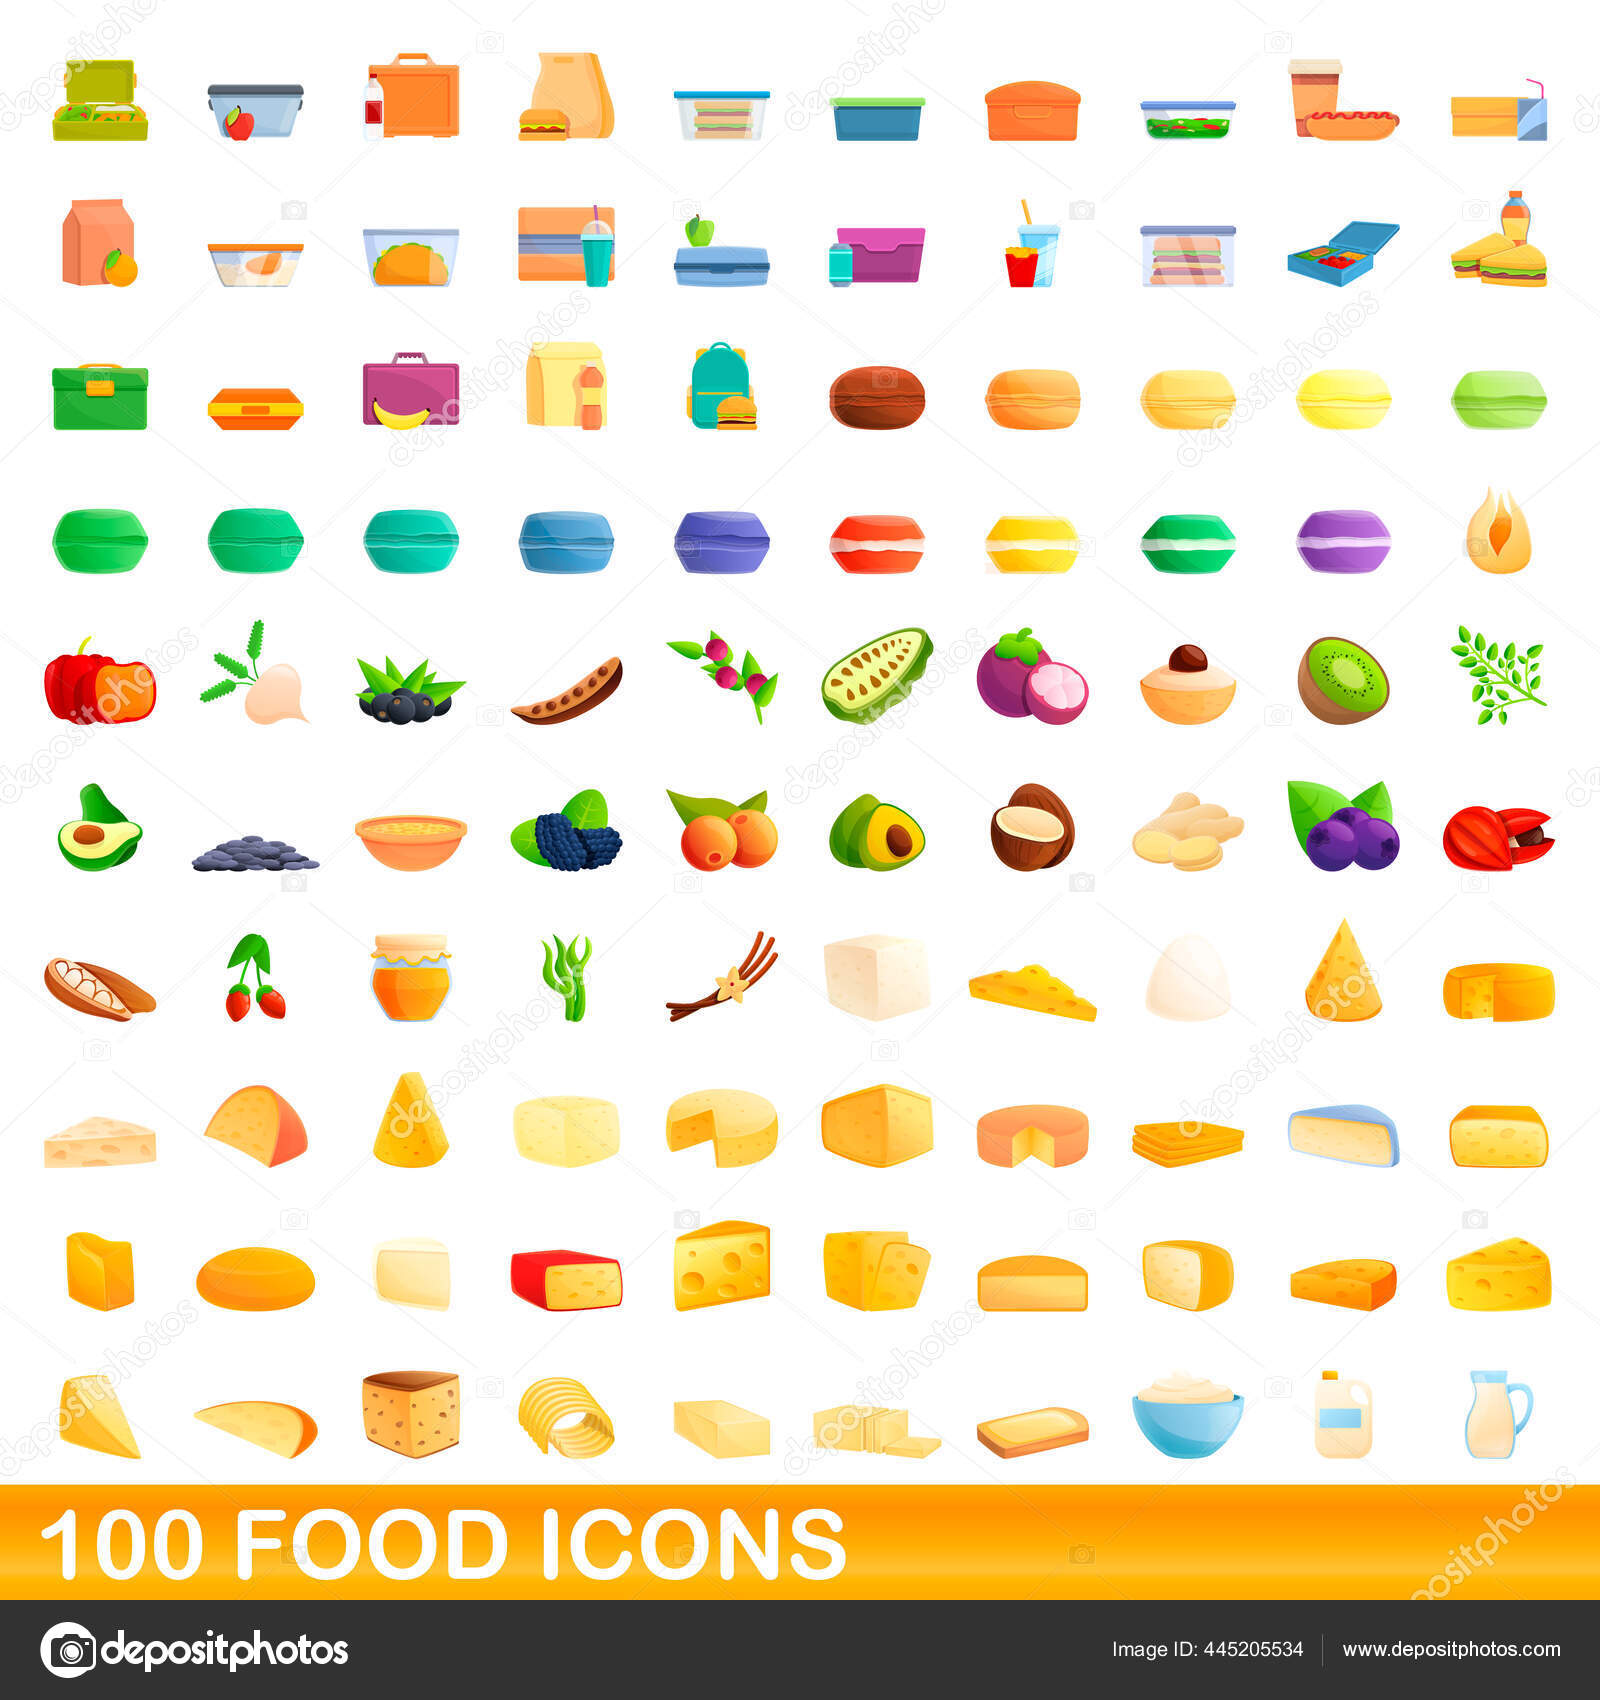 100 household goods icons set cartoon style Vector Image